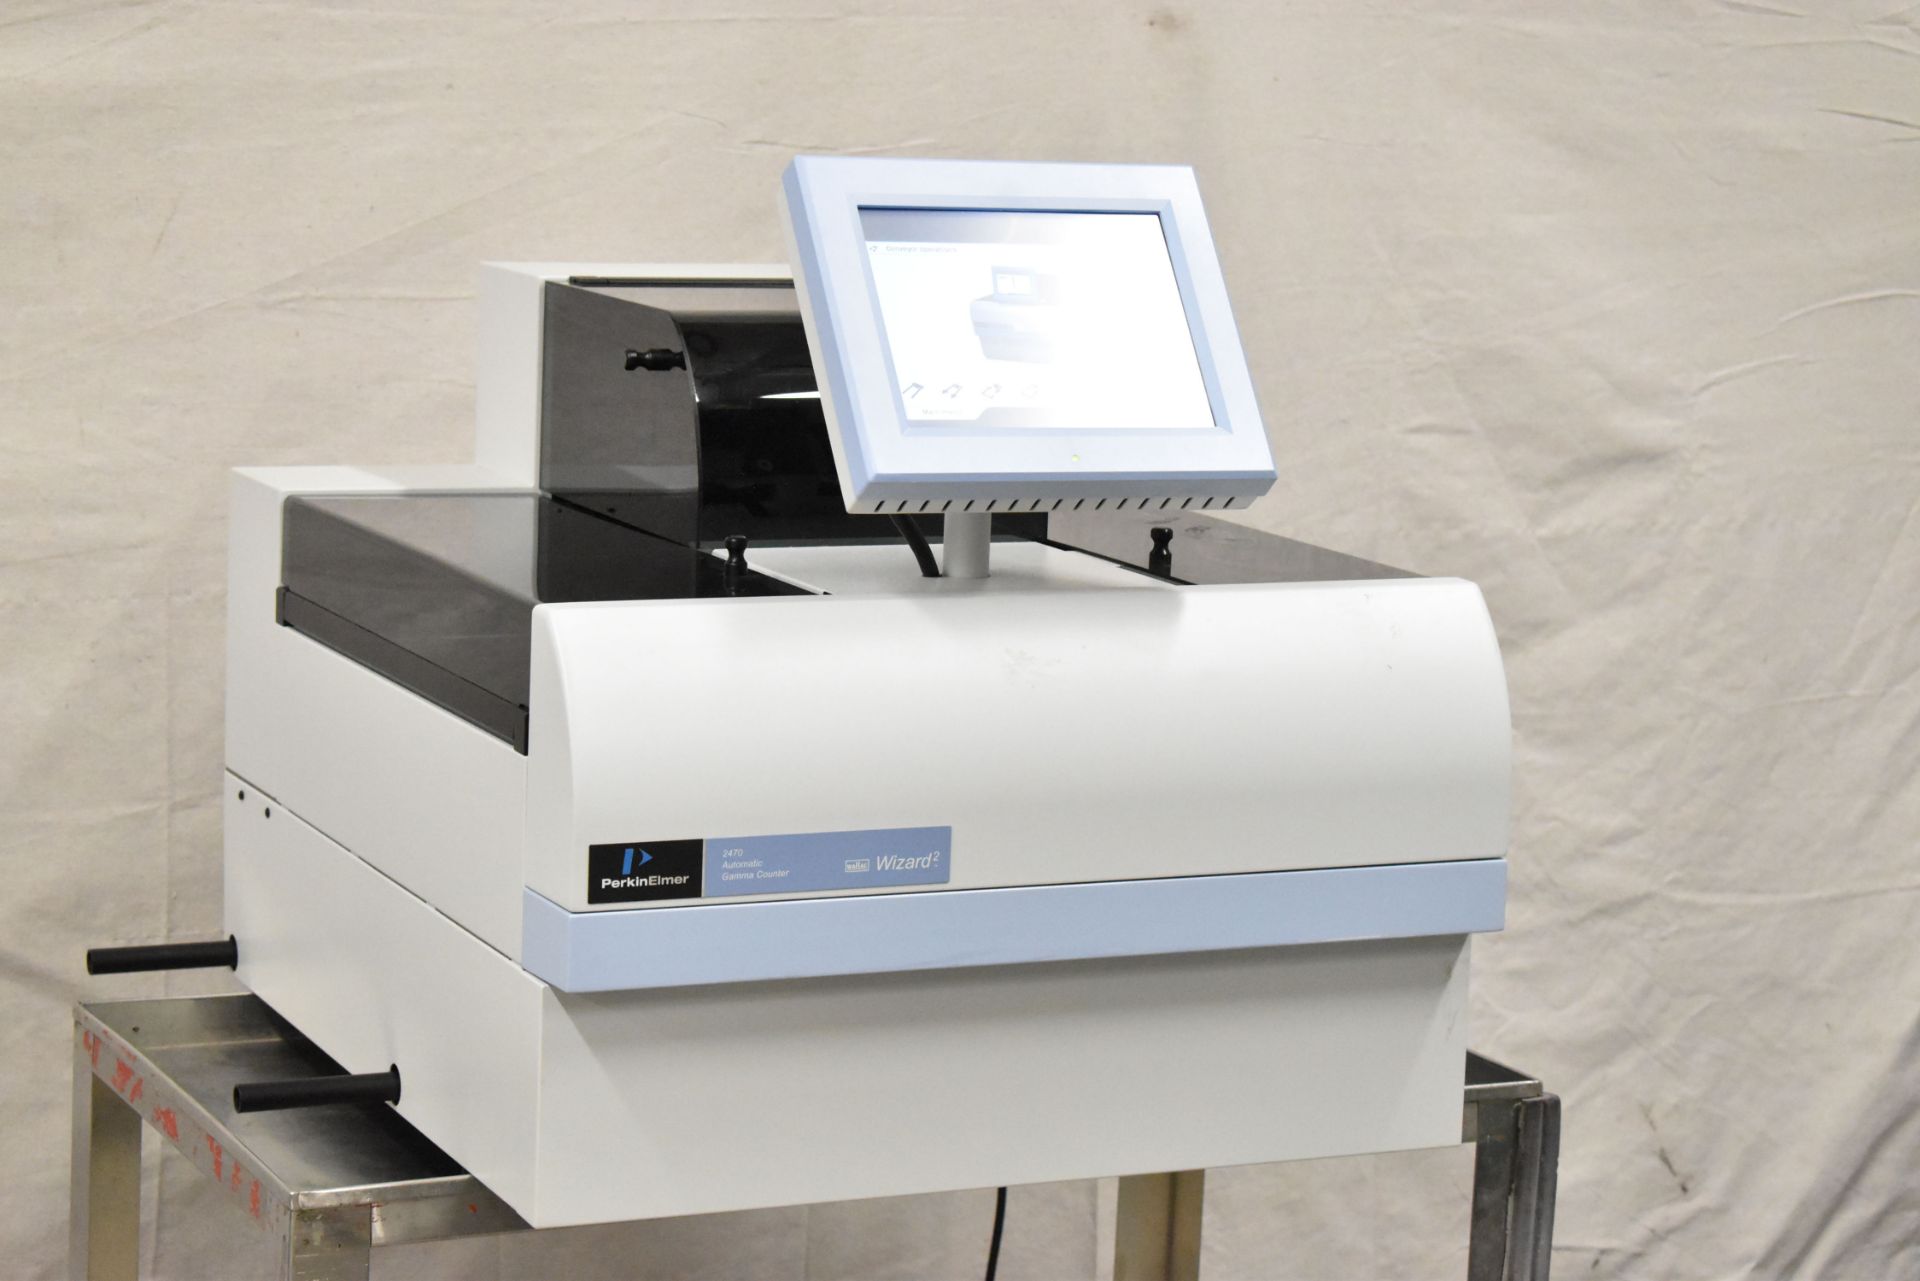 PERKIN ELMER (2011) 2470 WIZARD 2 AUTOMATIC GAMMA COUNTER WITH COLOR TOUCH SCREEN CONTROL, 13MM DIA. - Image 2 of 11